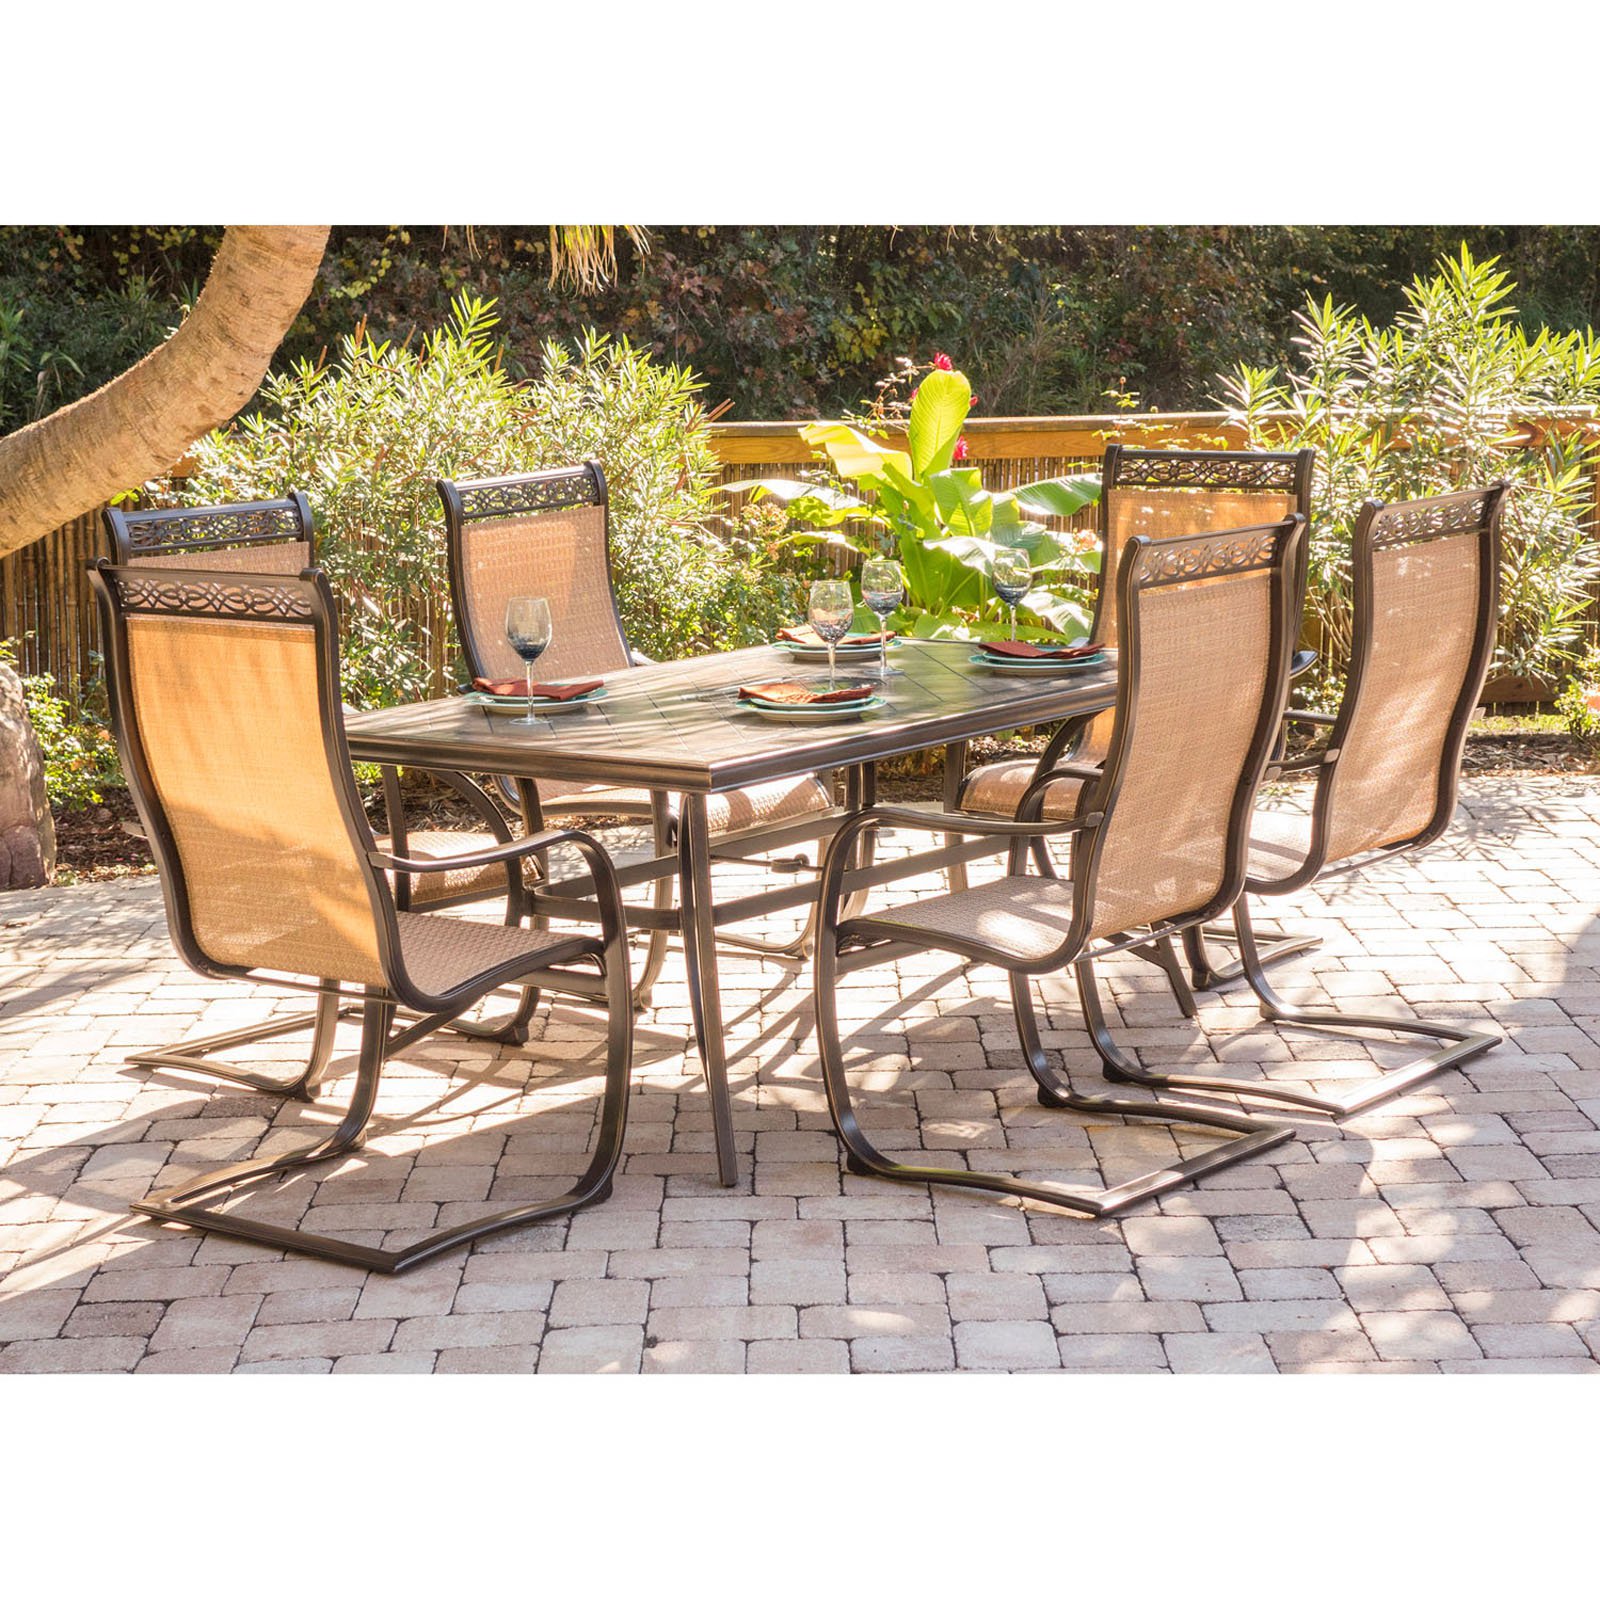 Hanover Outdoor Monaco 7-Piece Tile-Top Dining Set with Sling Chairs and Umbrella with Stand, Cedar - image 3 of 12